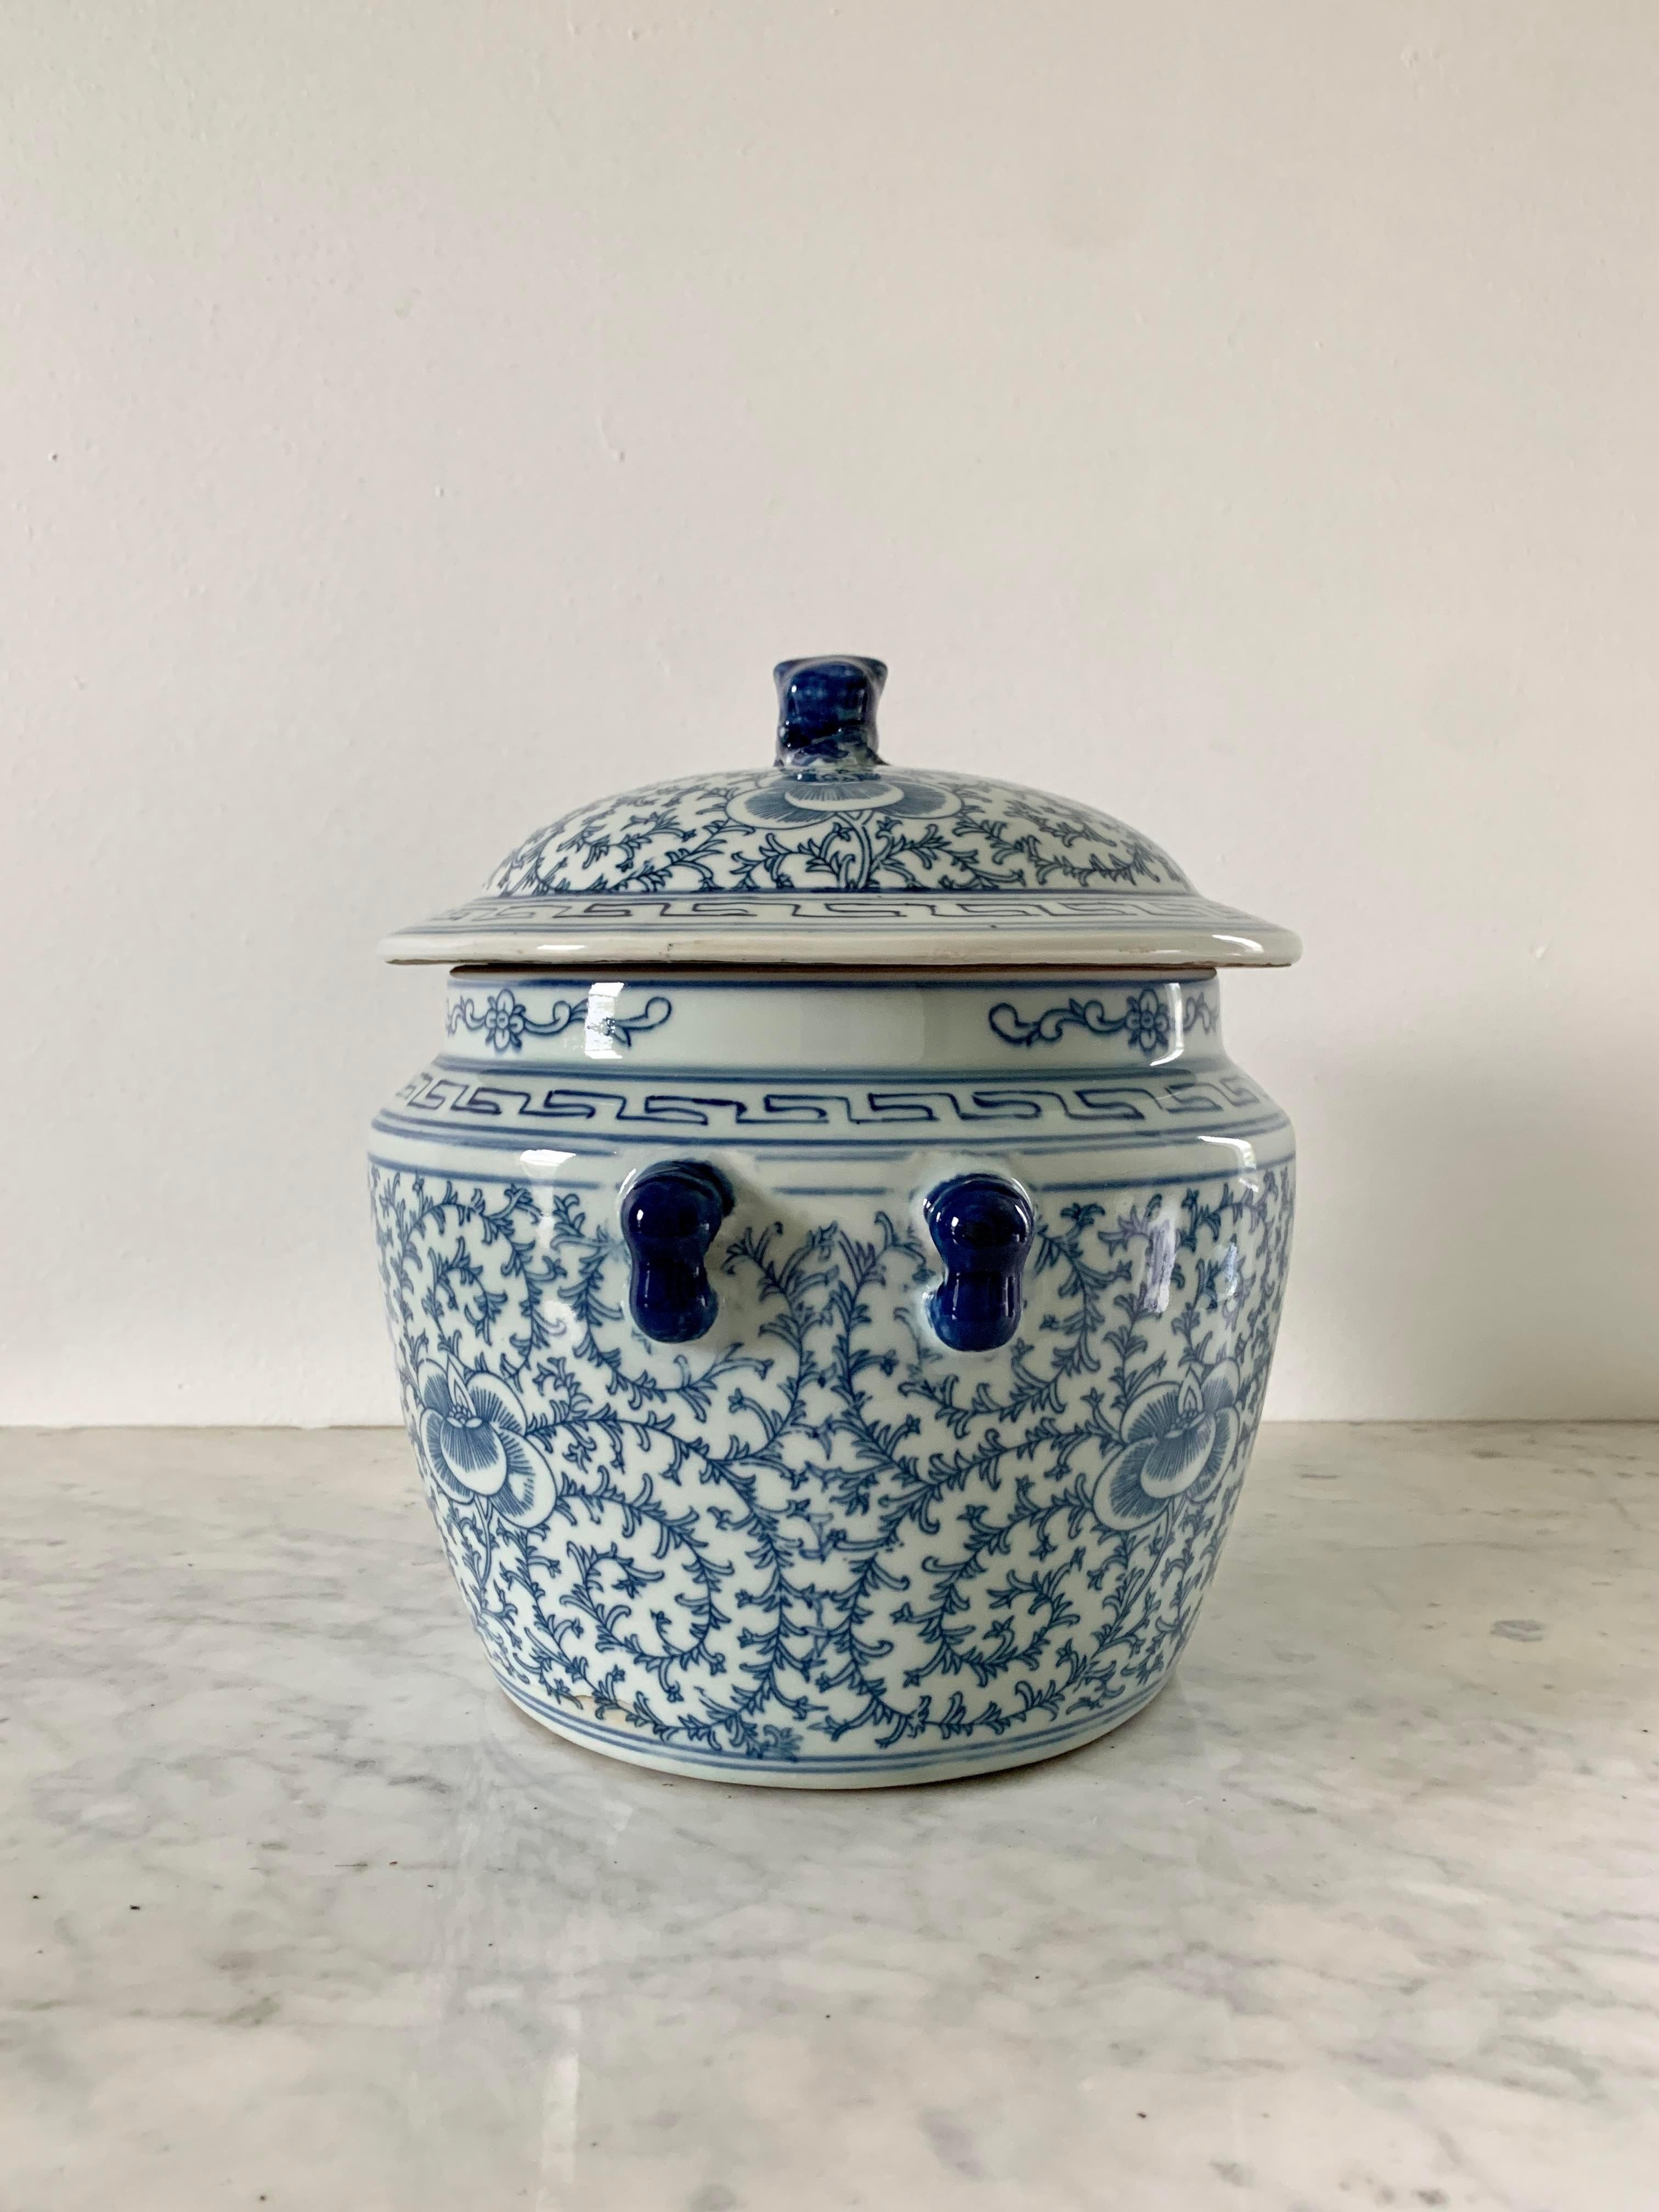 20th Century Chinese Blue and White Porcelain Covered Jars with Foo Dog Finials, Pair For Sale